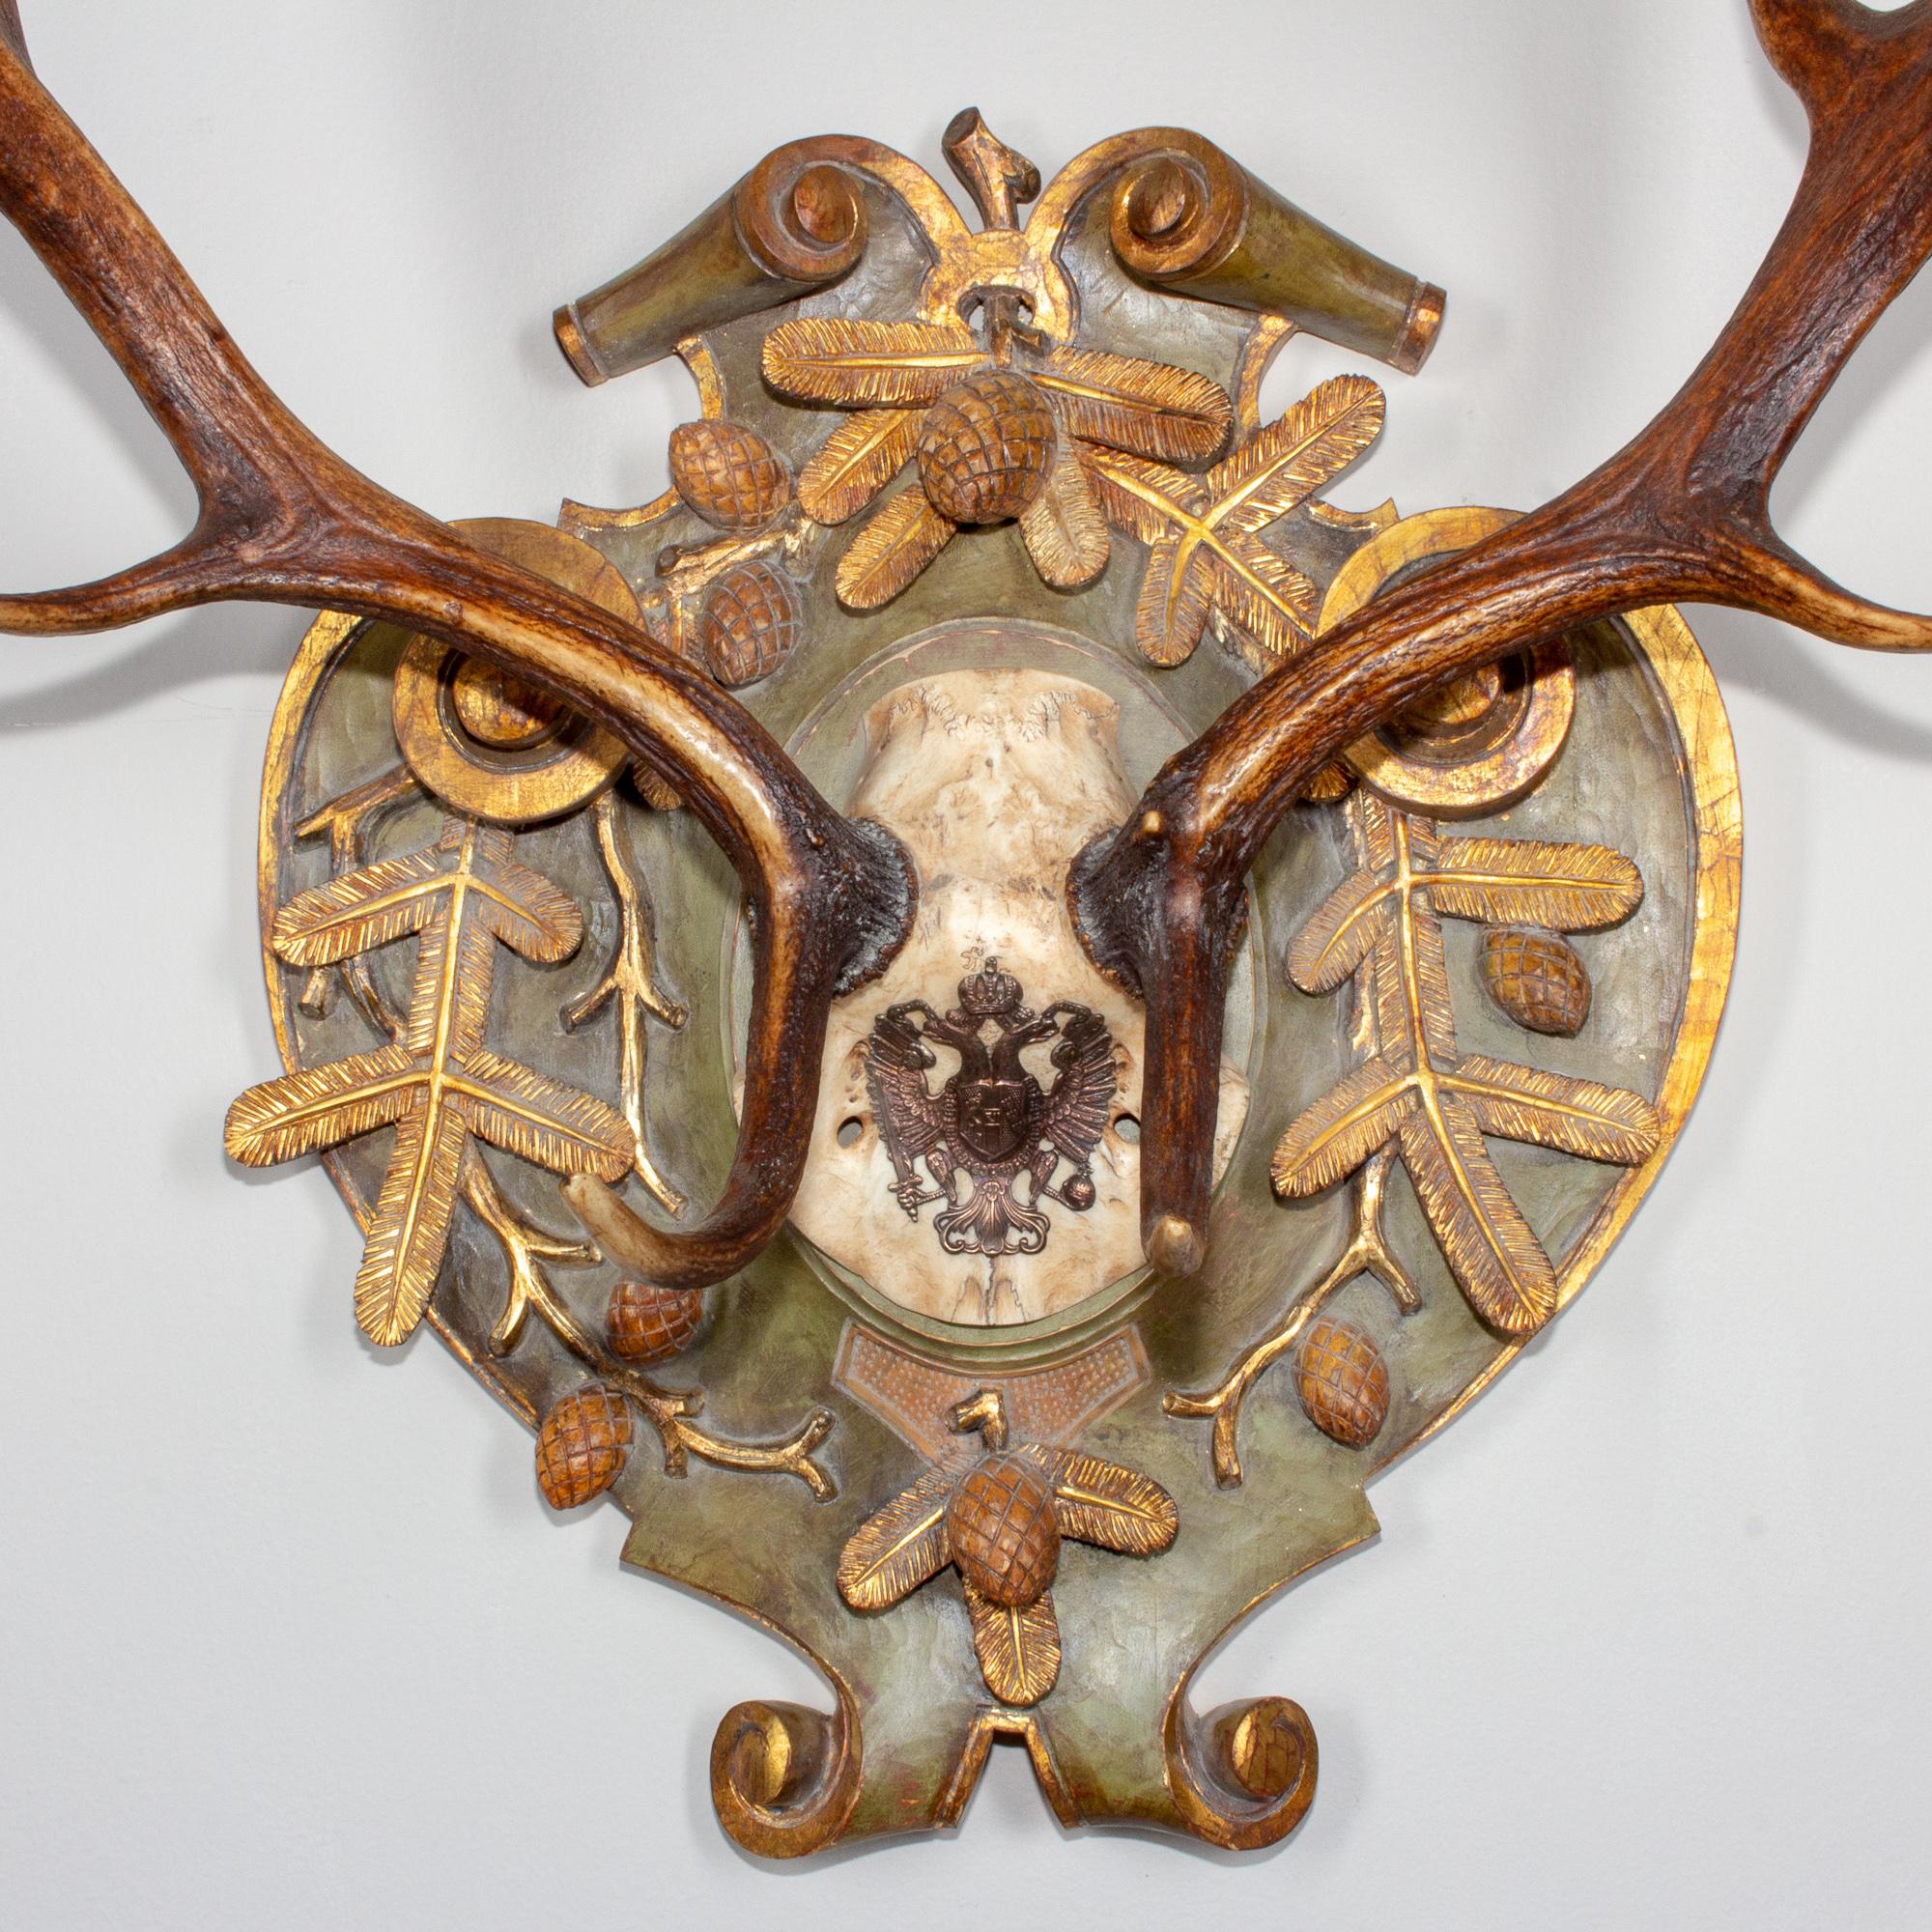 19th century fallow deer from Emperor Franz Josef's castle at Eckartsau in the Southern Austrian Alps, a favorite hunting schloss of the Habsburg Royal family. This historic hunting trophy features a replacement hand-carved linden wood plaque with